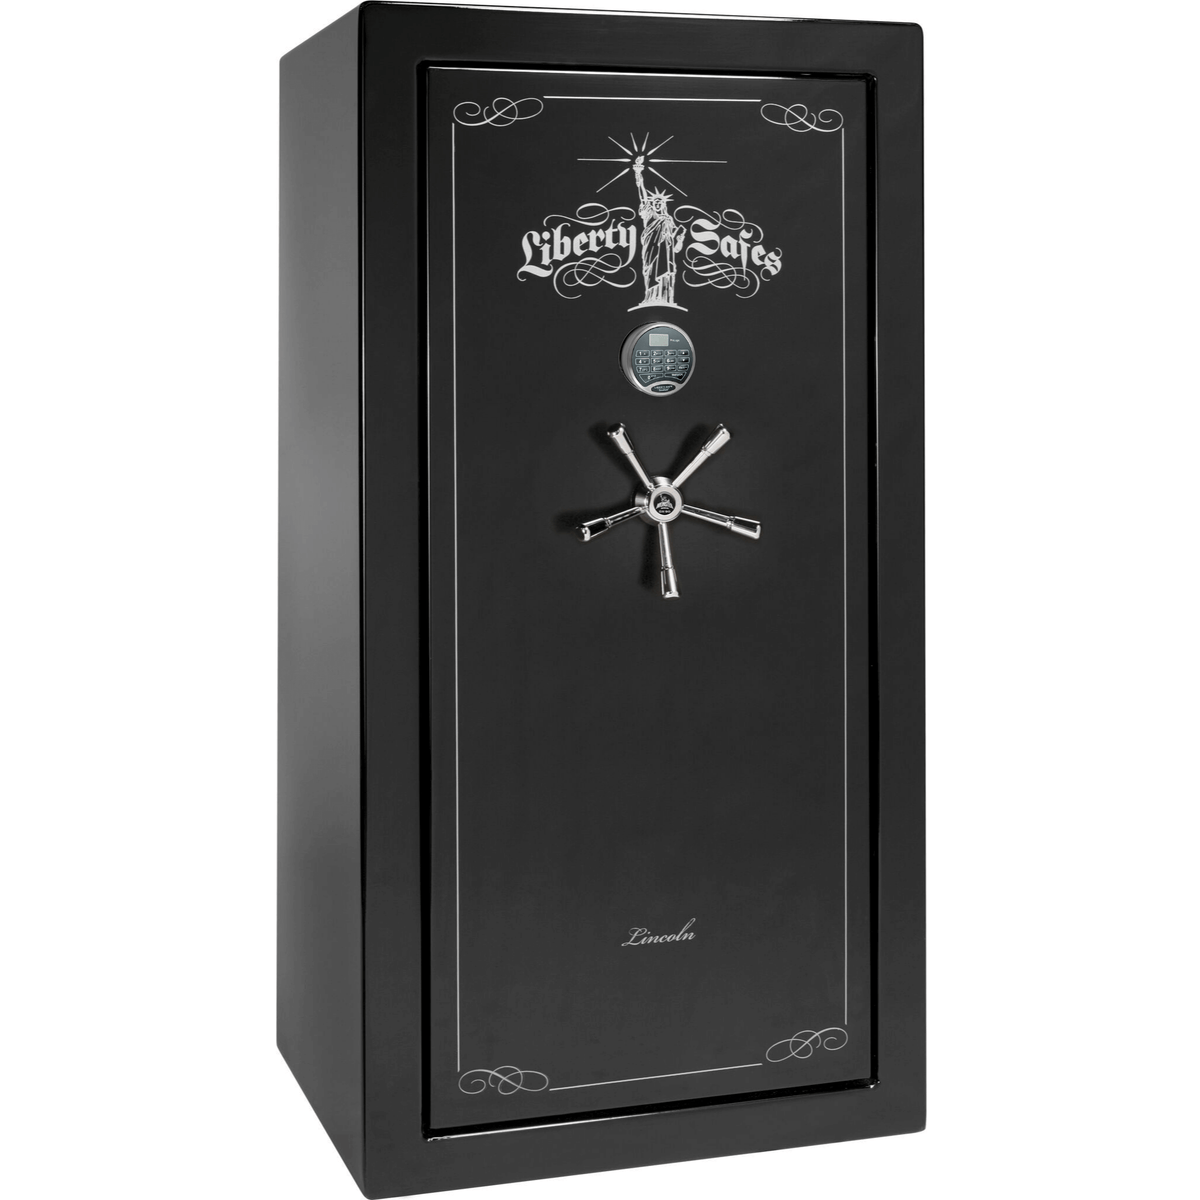 Liberty Lincoln 25 Safe in Black Gloss with Chrome Electronic Lock.